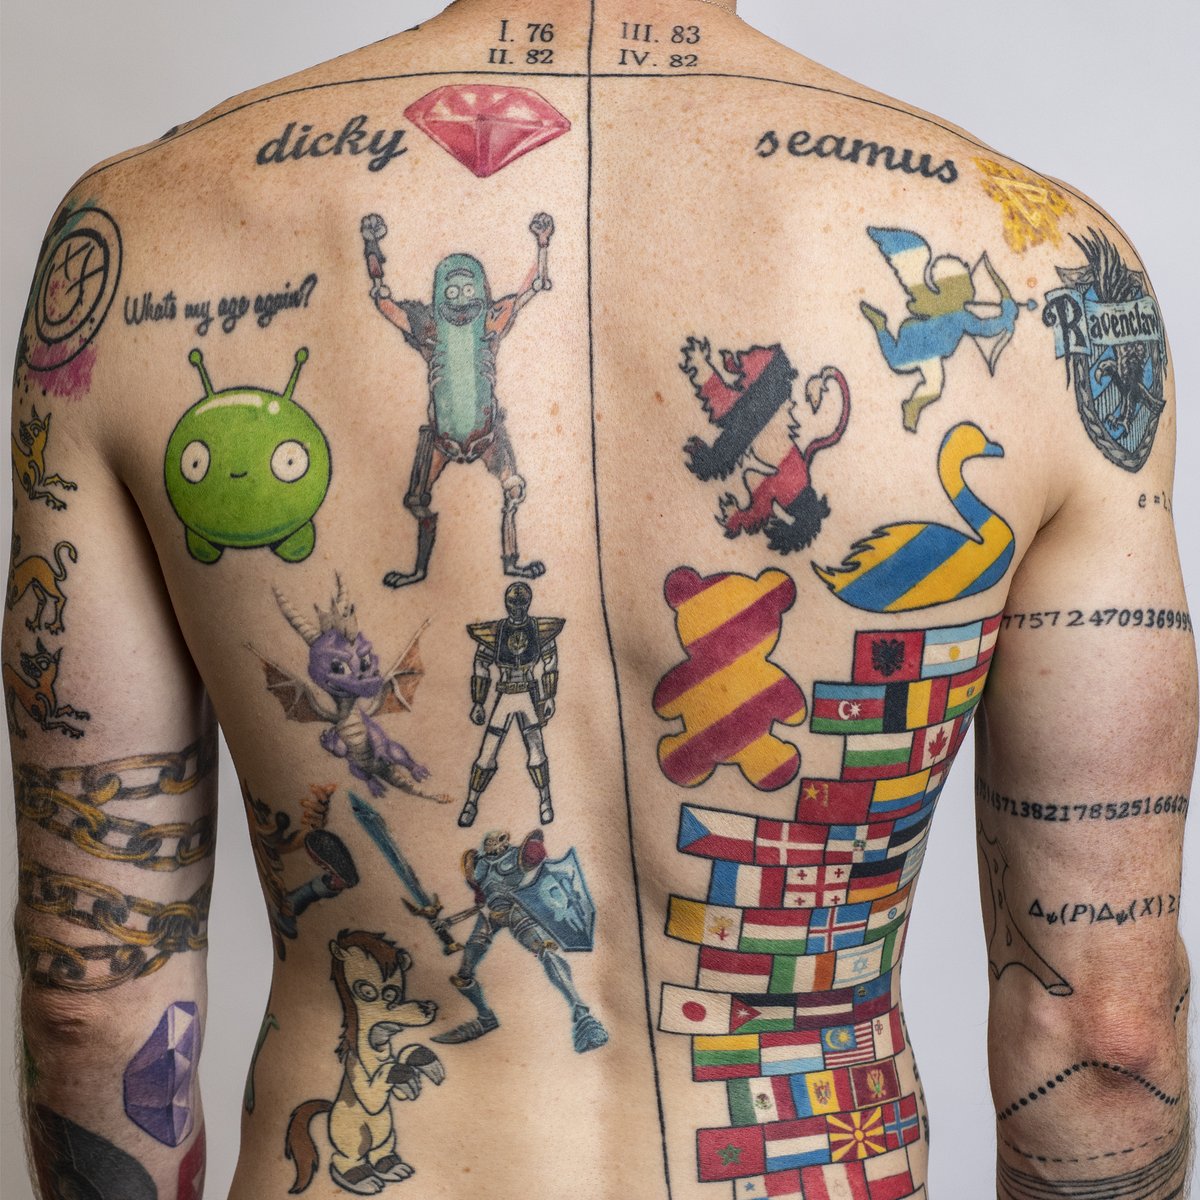 You’ve seen the front, now it’s time for the back. This is the 2nd photo from the 'Tattooed Academics' exhibition @RMGreenwich as part of @inkupmarkout. How many do you recognise? Credit Royal Museums Greenwich 2023, Tattooed Academics